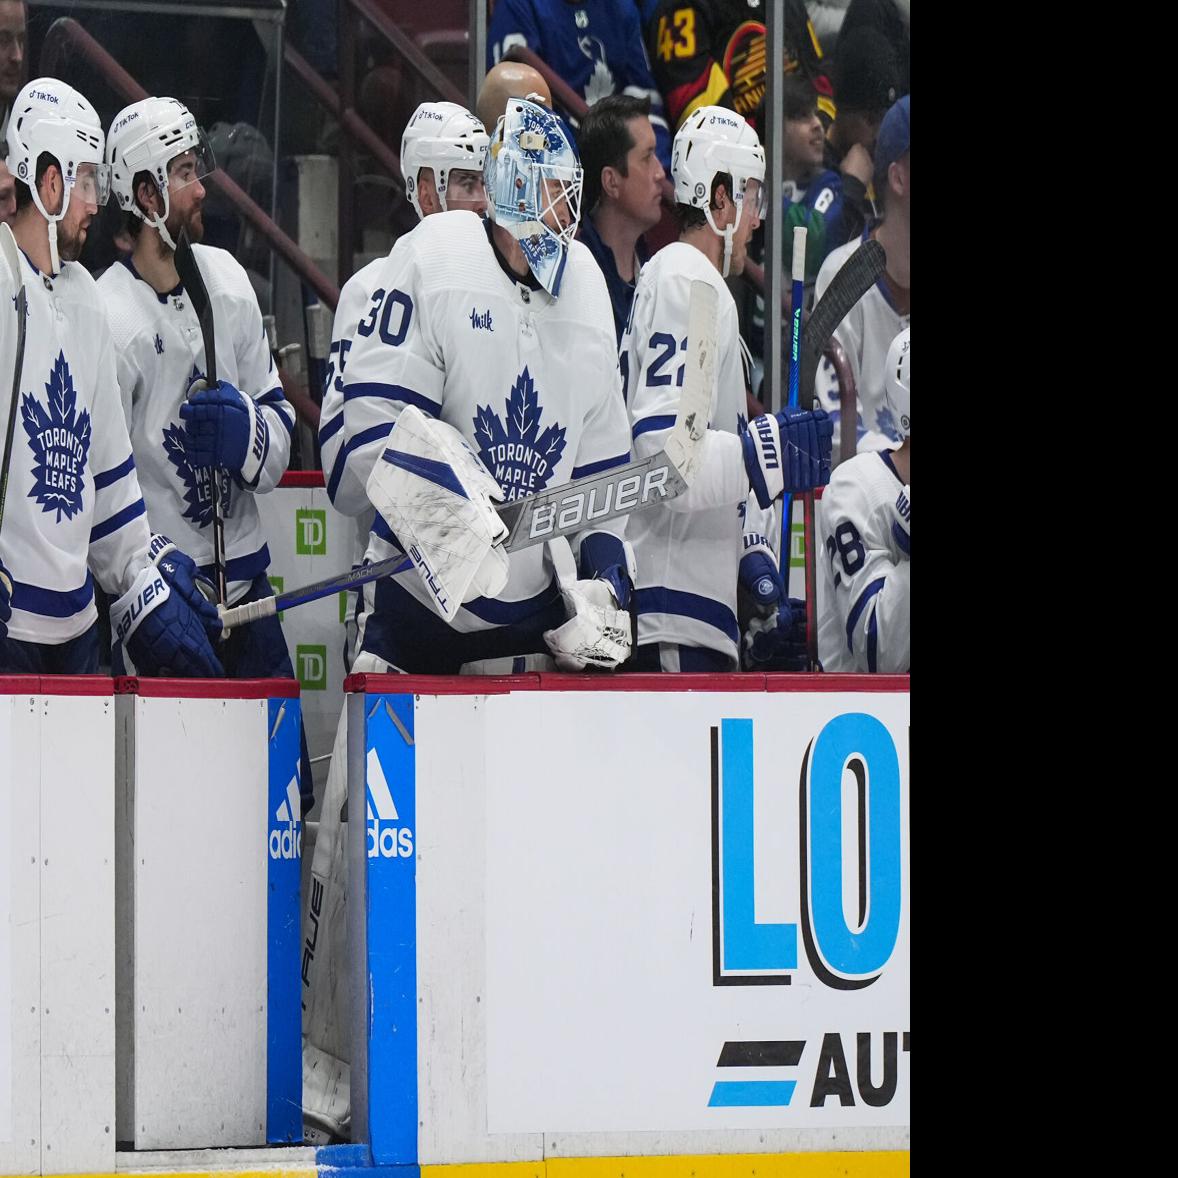 Toronto Maple Leafs vs New Jersey Devils Odds - Tuesday March 7 2023